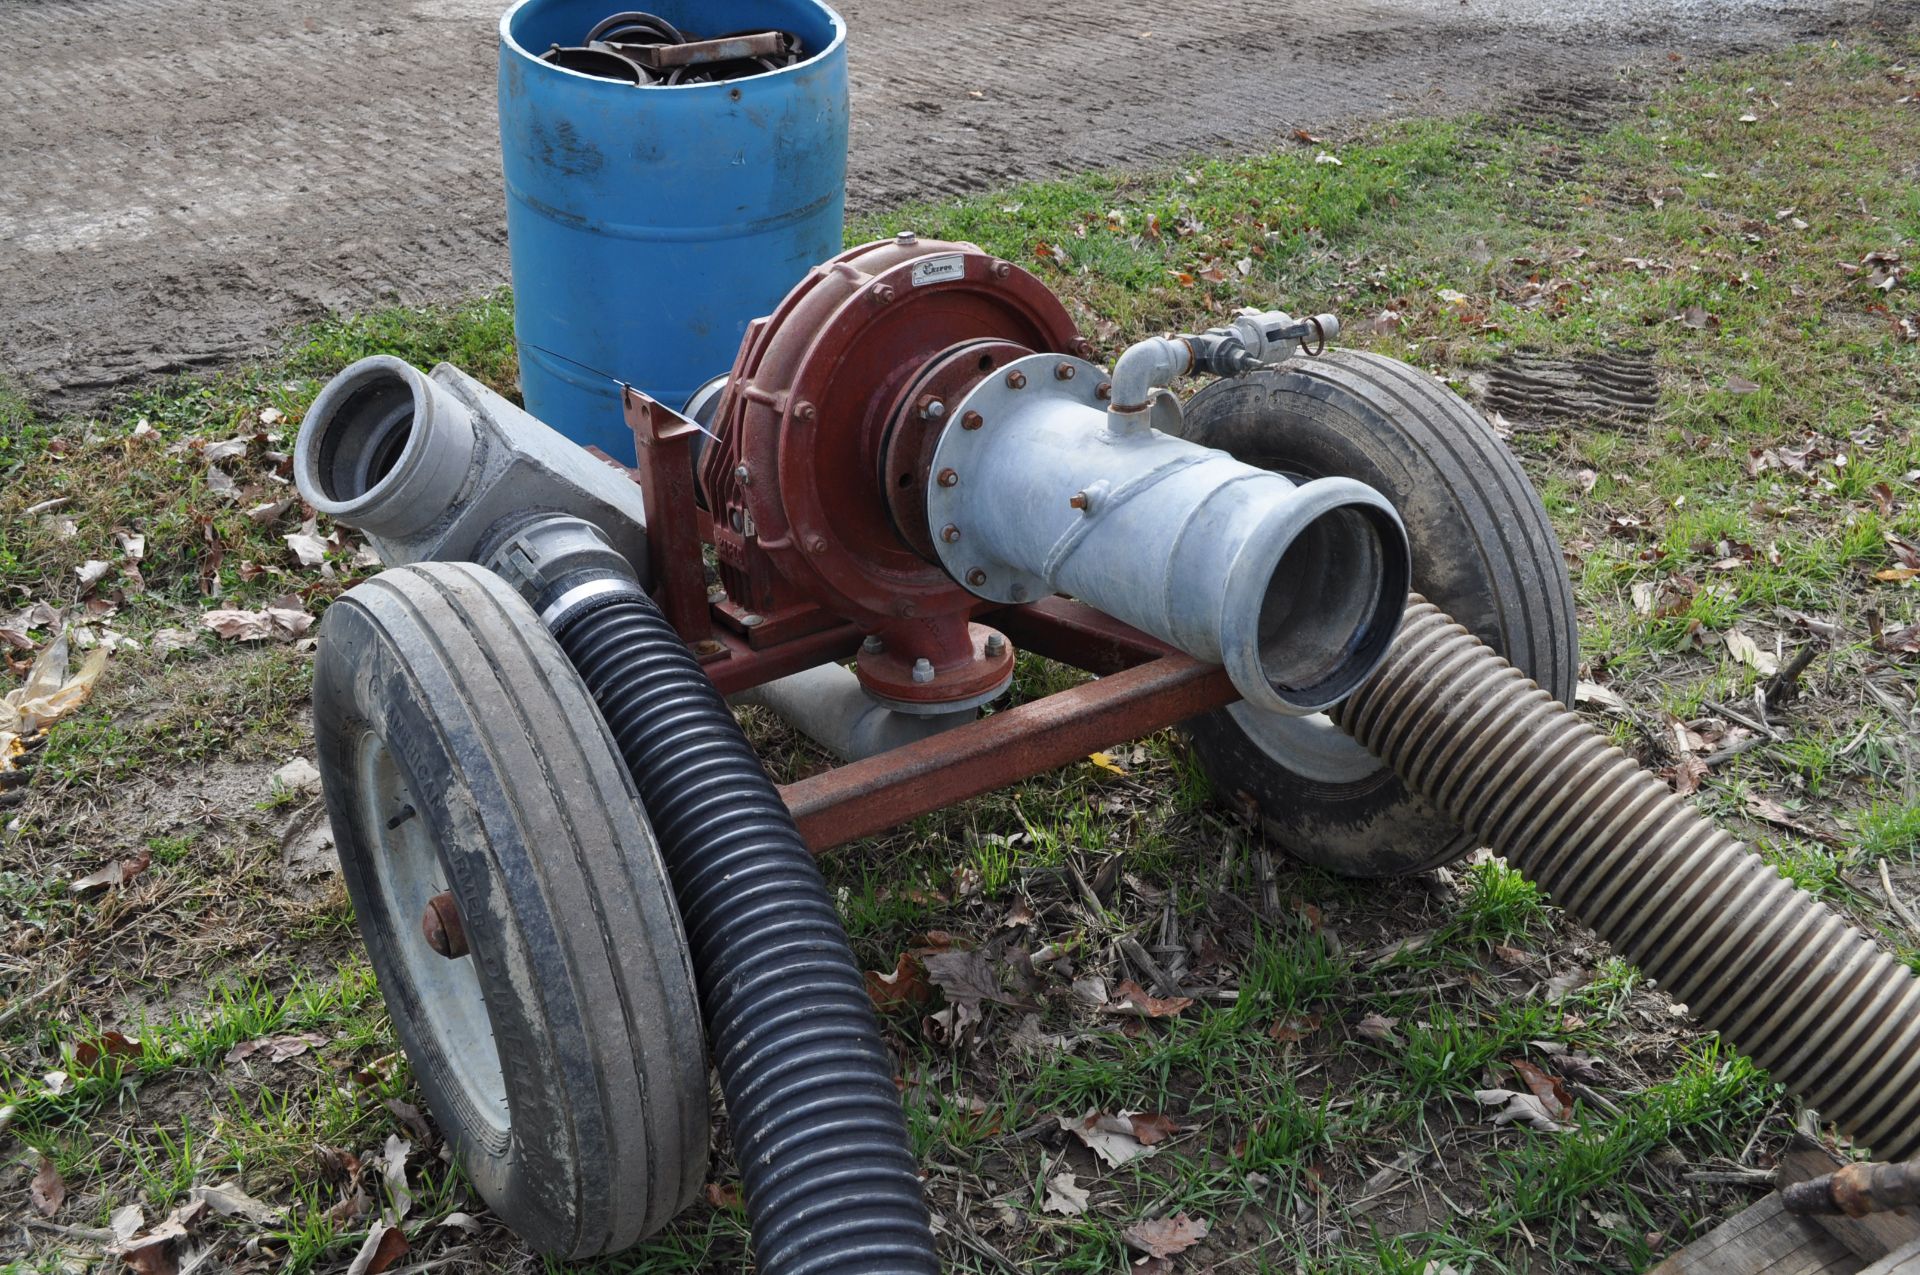 Rainway HPRL 600 pump, with hyd drive submersible pump and hose - Image 5 of 7